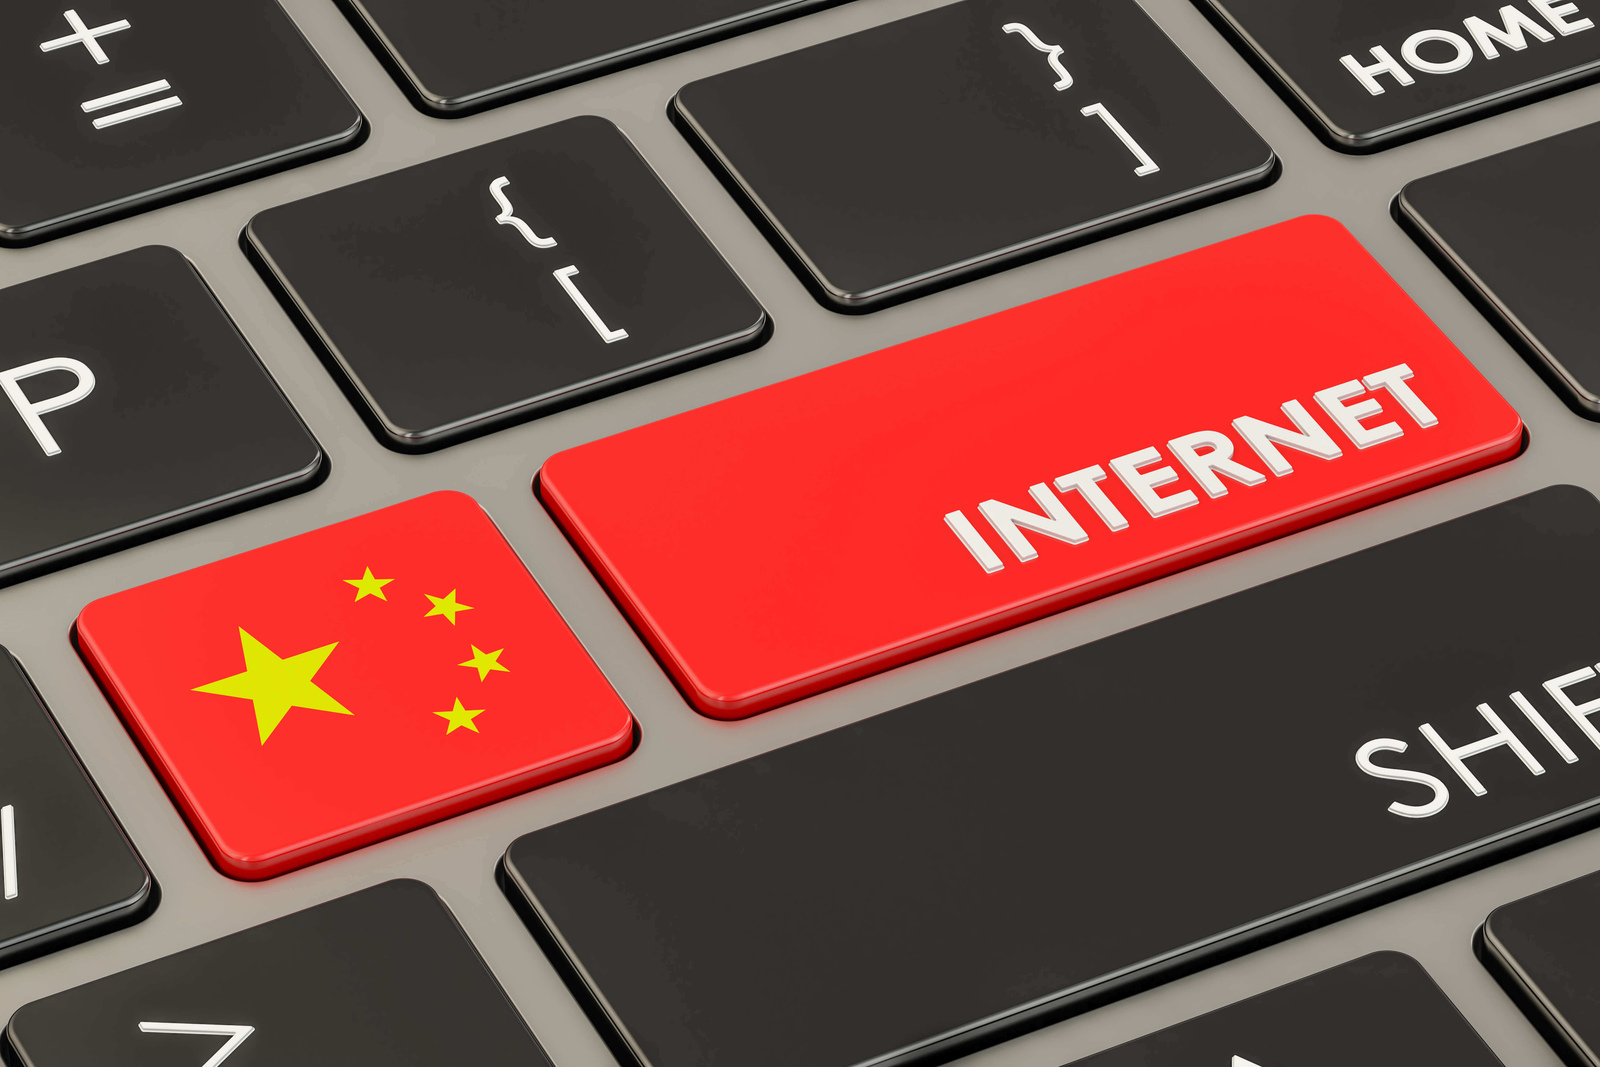 Setting up a website for China's audience? Here are 2 considerations you may not be aware of.